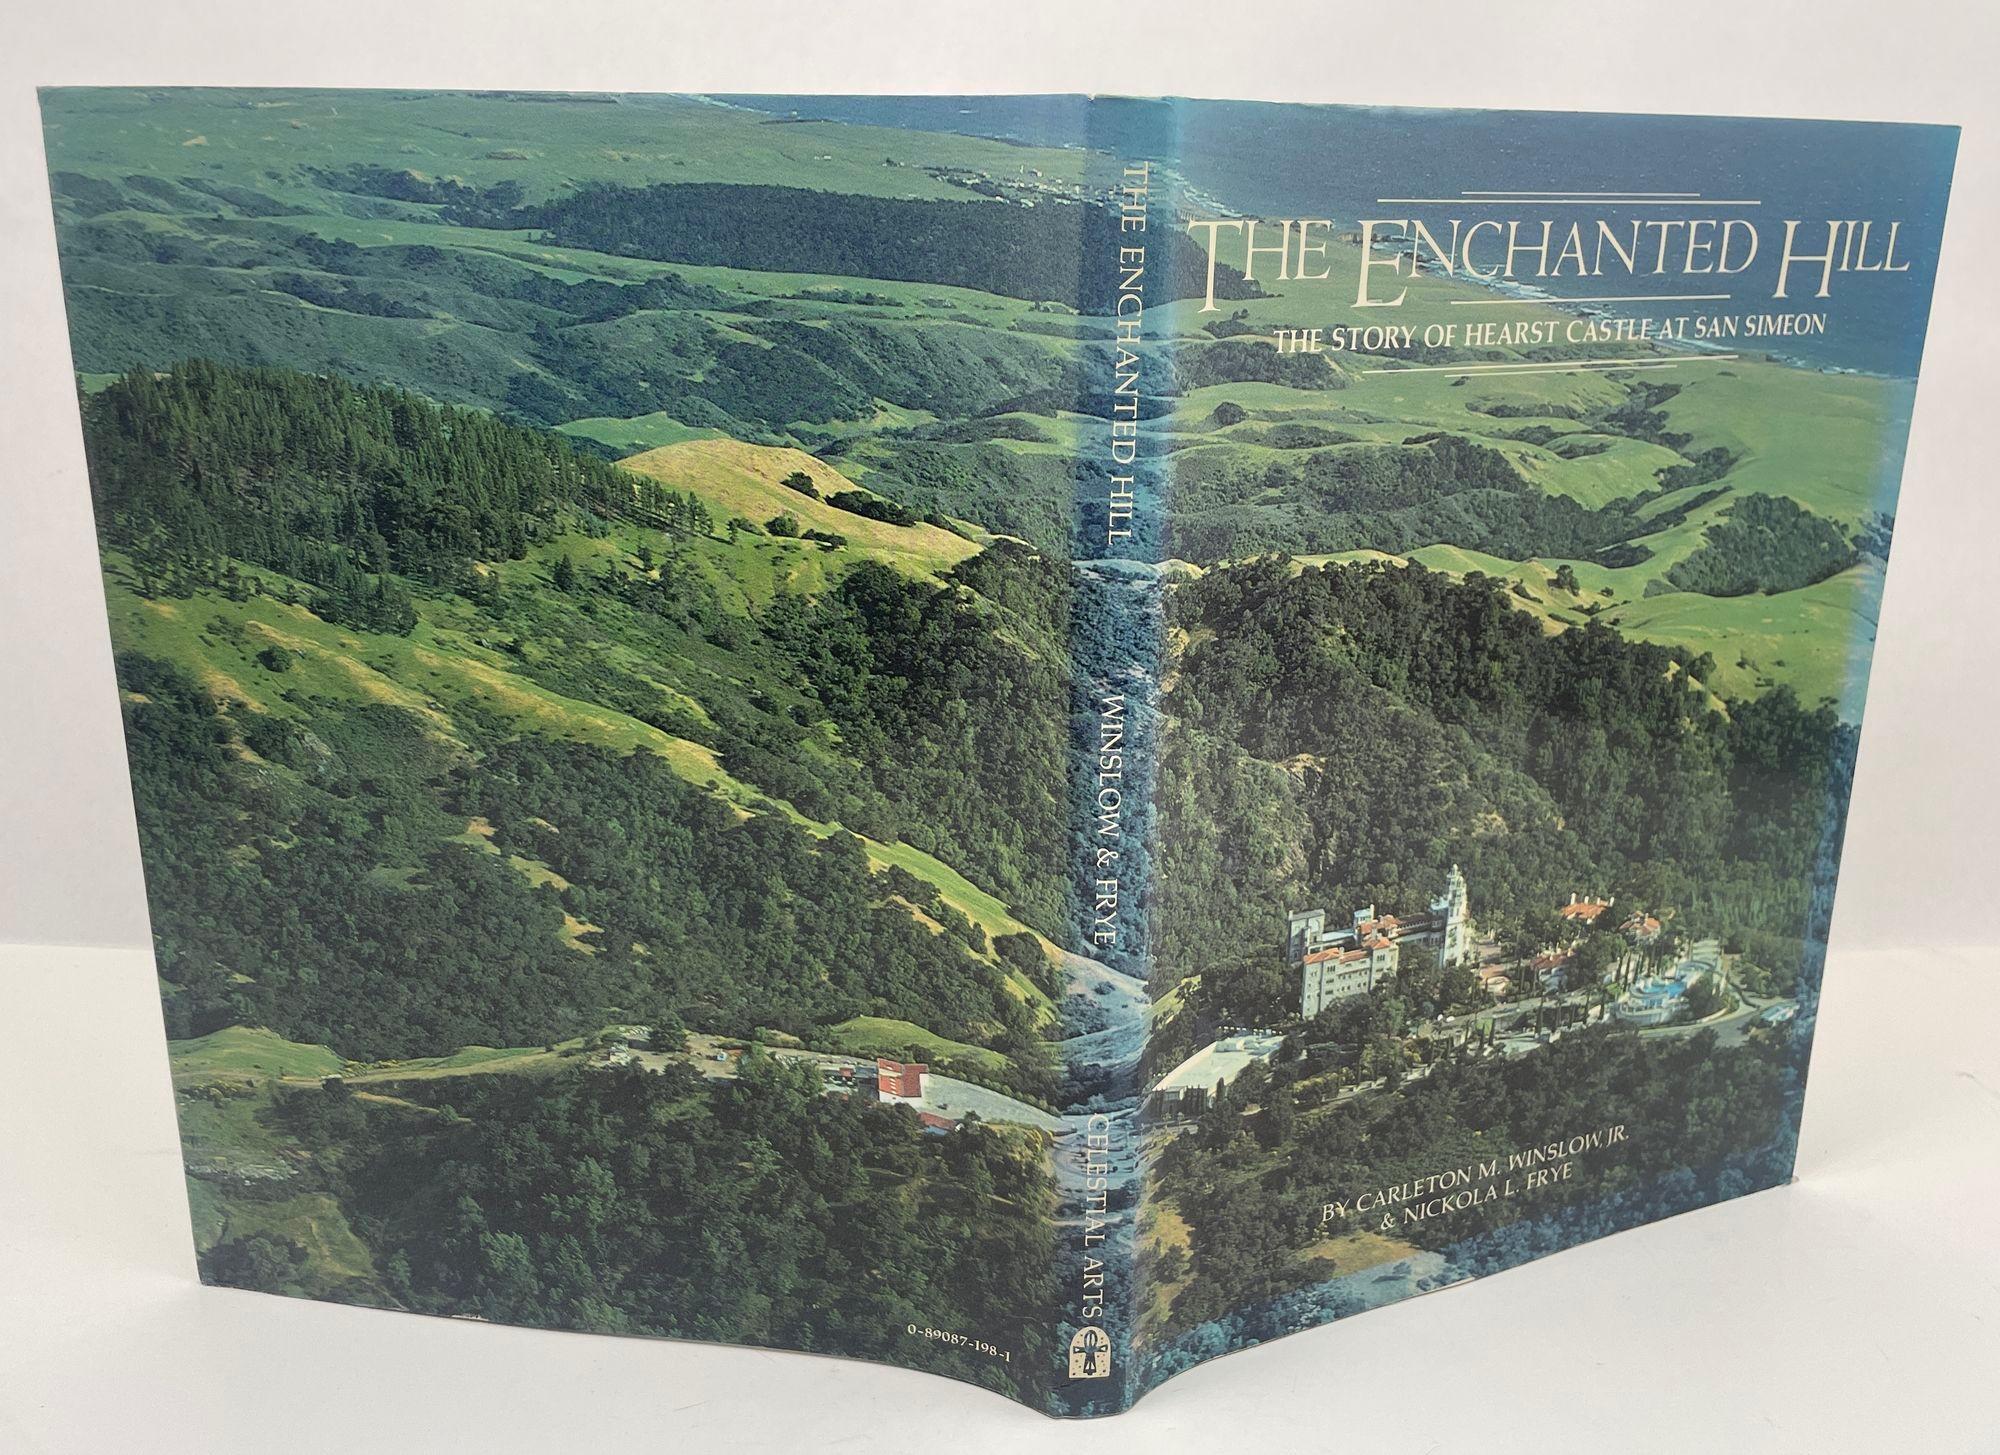 20th Century The Enchanted Hill The story of Hearst Castle at San Simeon Hardcover 1980 For Sale